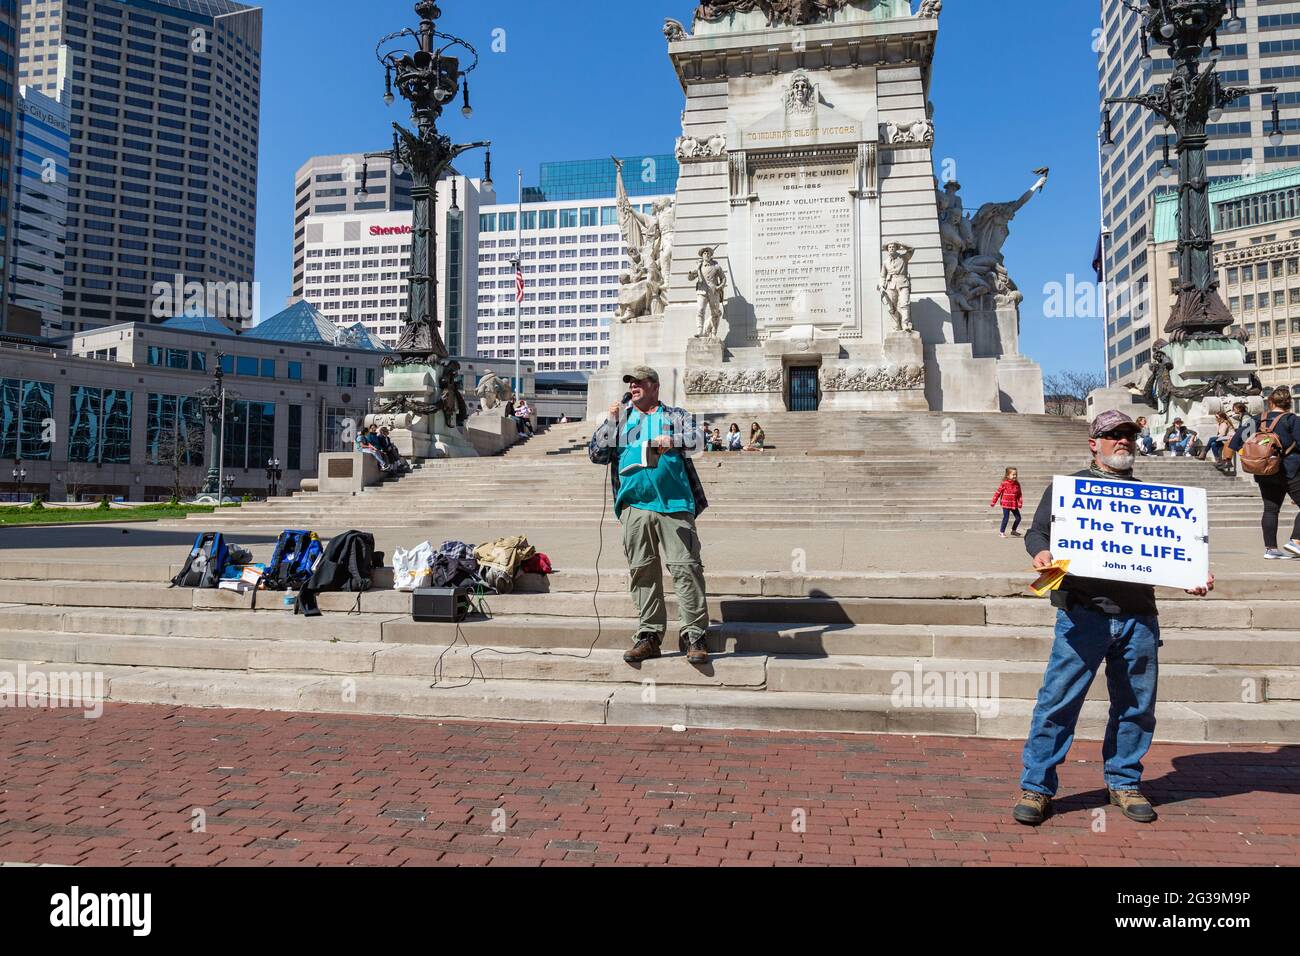 Two street evangelists proclaim the Truth on the steps of the Soldiers and Sailors Monument on Monument Circle in downtown Indianapolis, Indiana, USA. Stock Photo